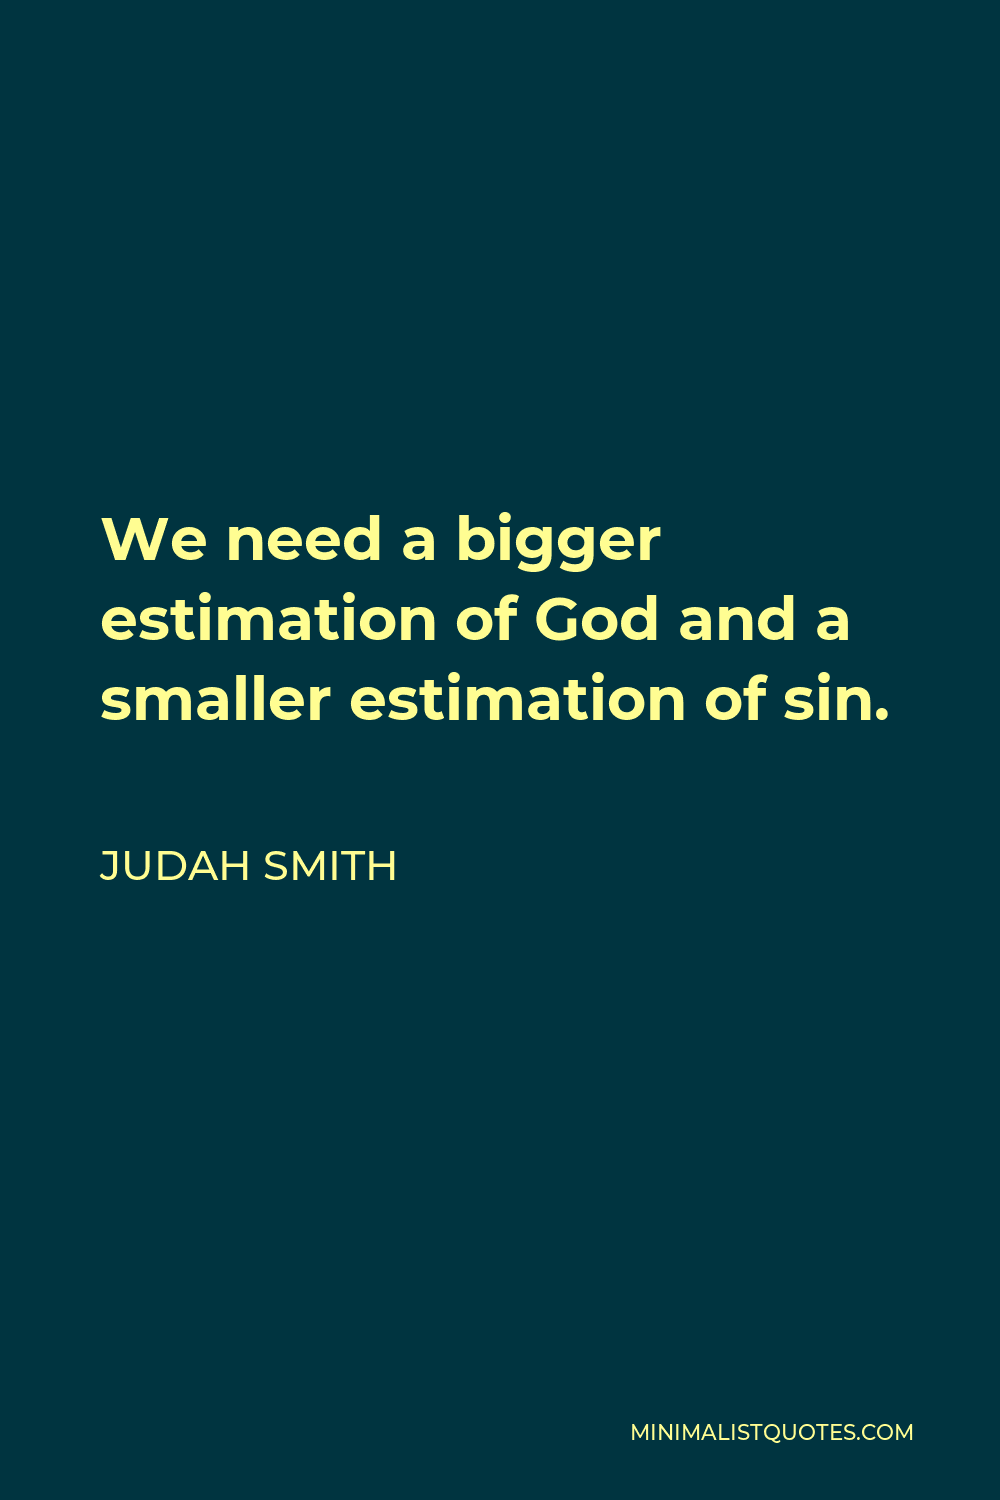 Judah Smith Quote - We need a bigger estimation of God and a smaller estimation of sin.